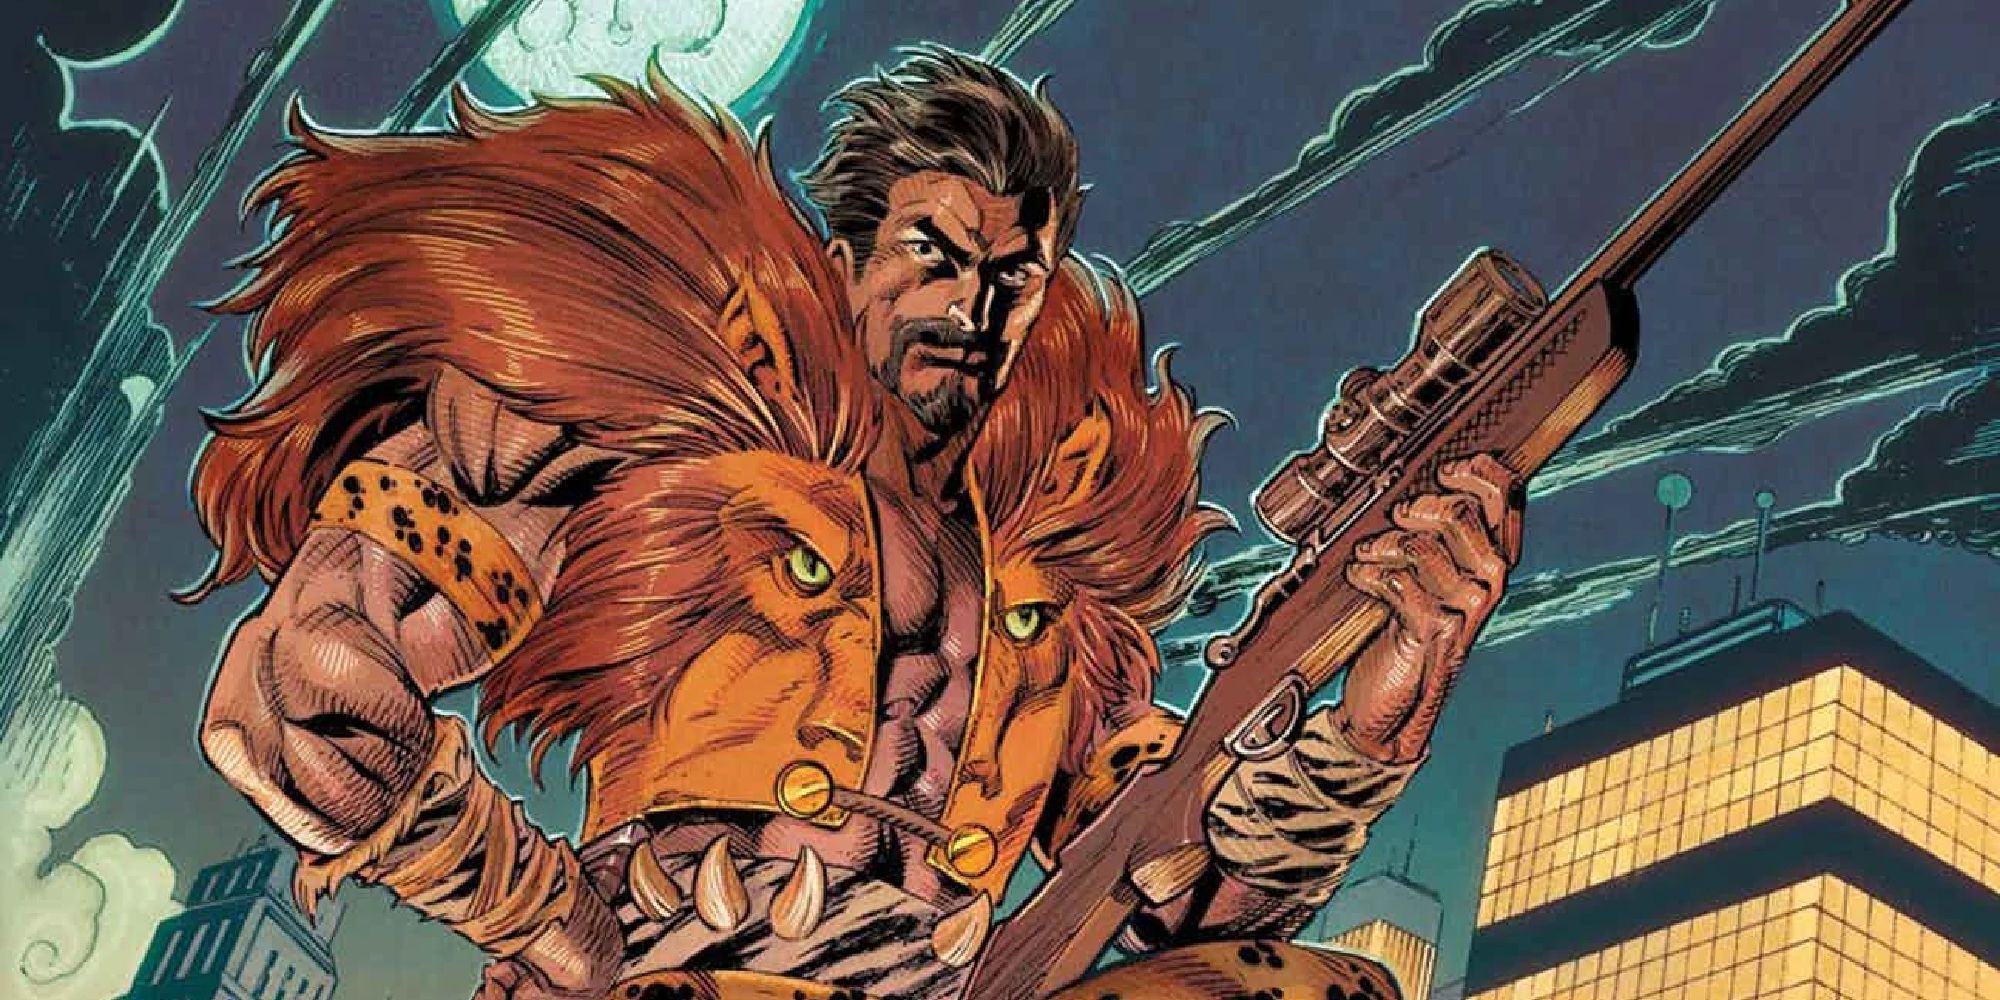 Kraven the Hunter holds a rifle over a cityscape in the comics